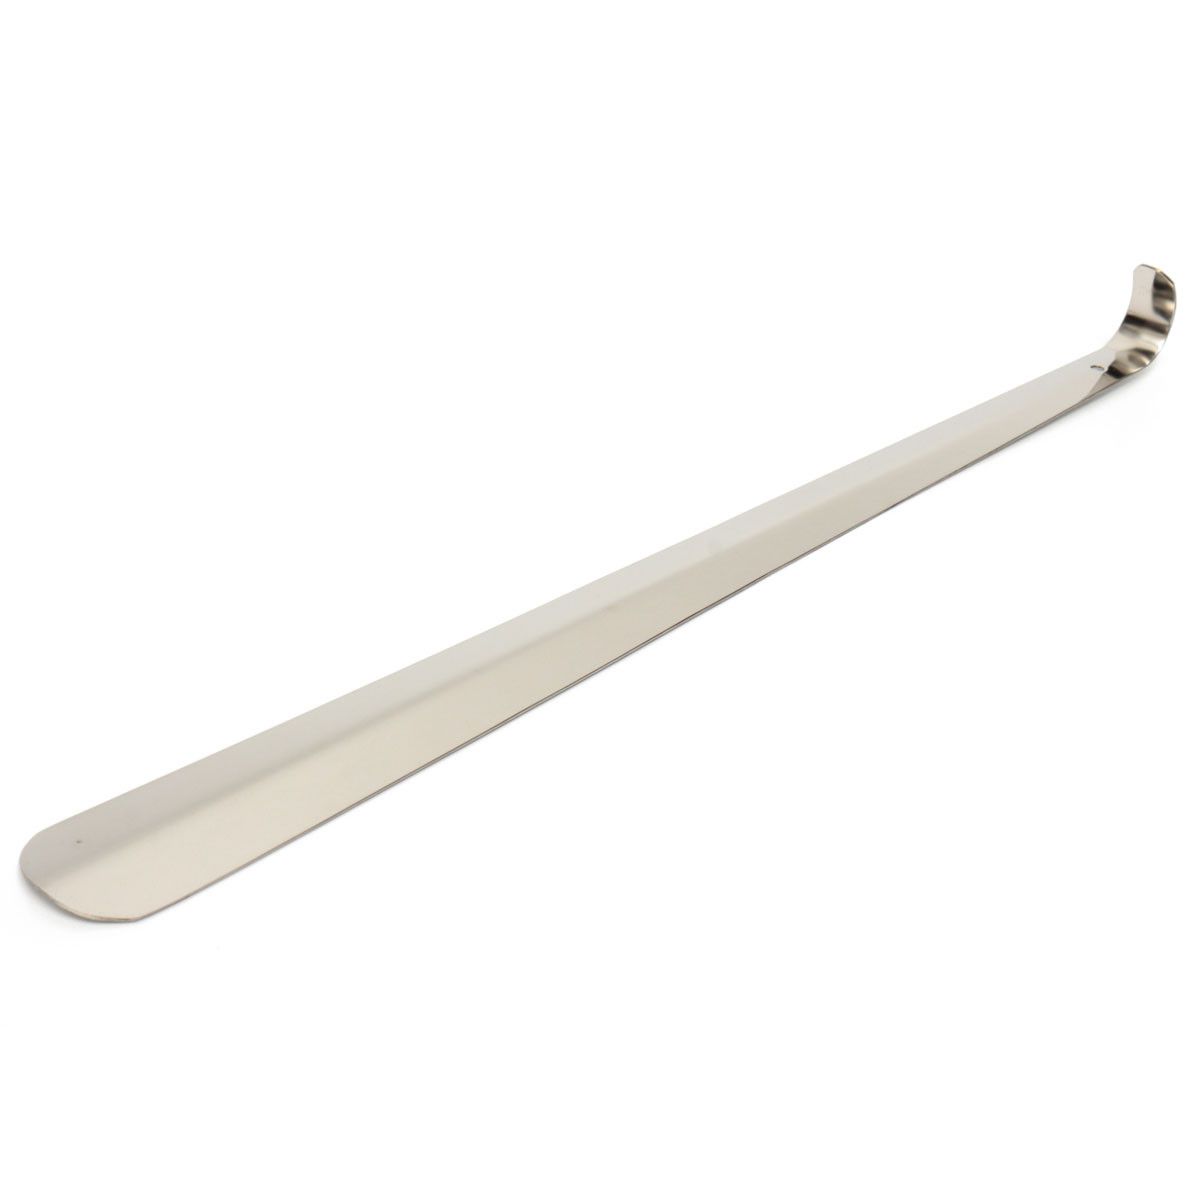 50CM-Shoe-Horn-Extra-Long-Stainless-Steel-Silver-Metal-Shoes-Remover-Shoehorn-1337543